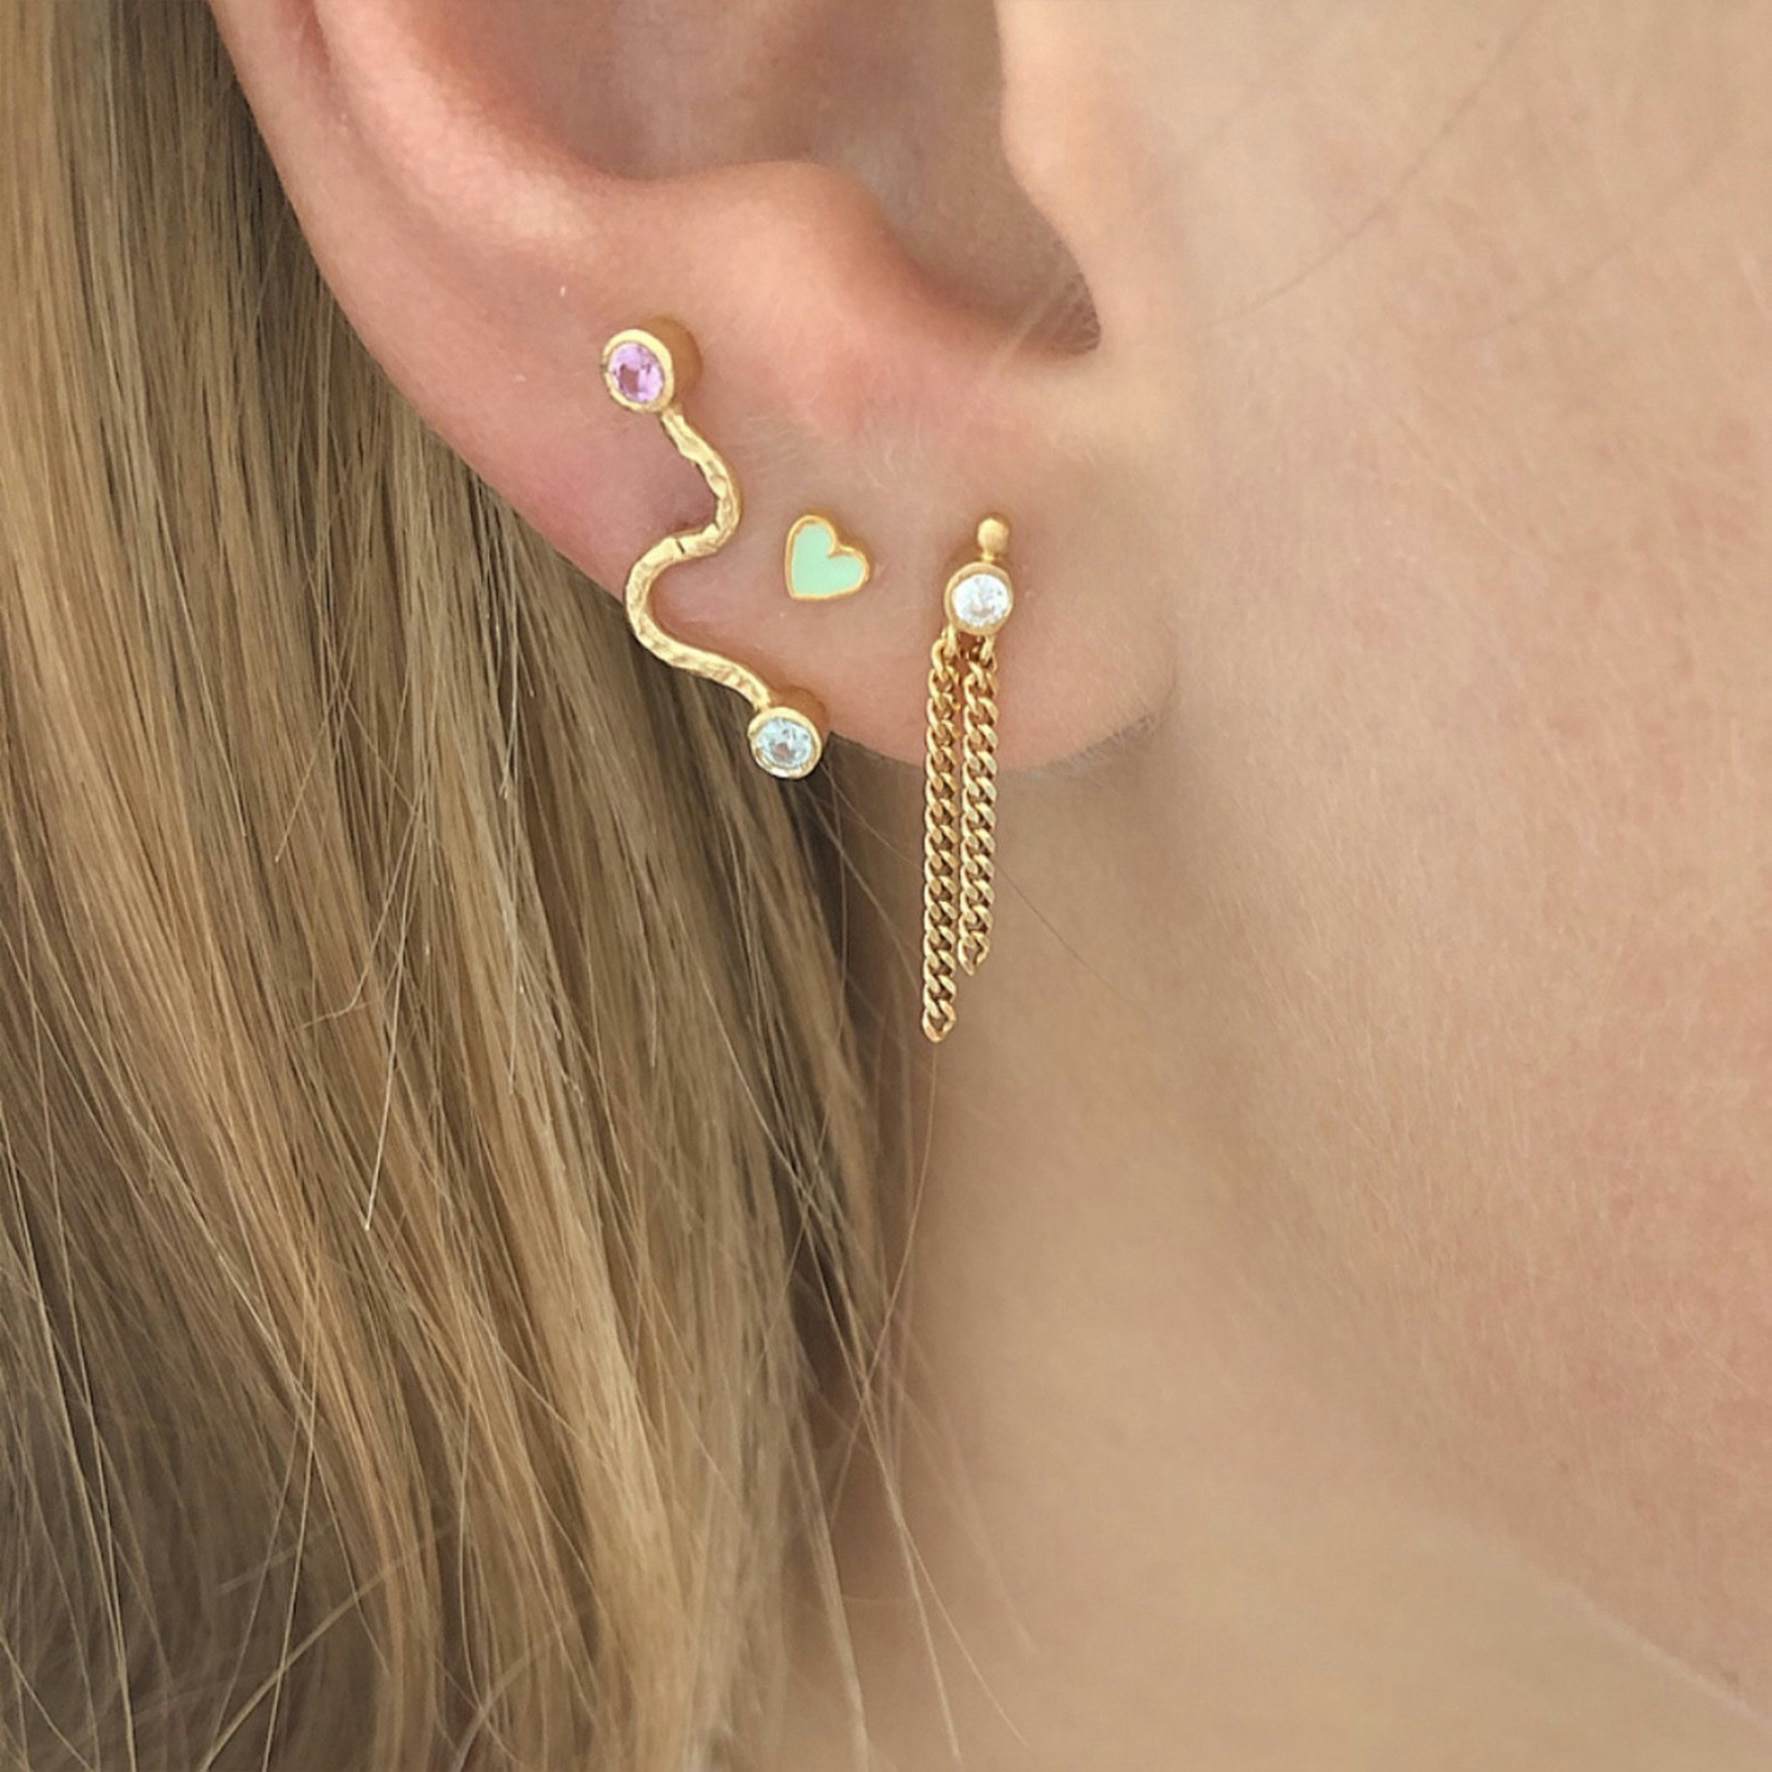 Big Wave Earstick With Pastel Pink & Blue Stones from STINE A Jewelry in Goldplated-Silver Sterling 925